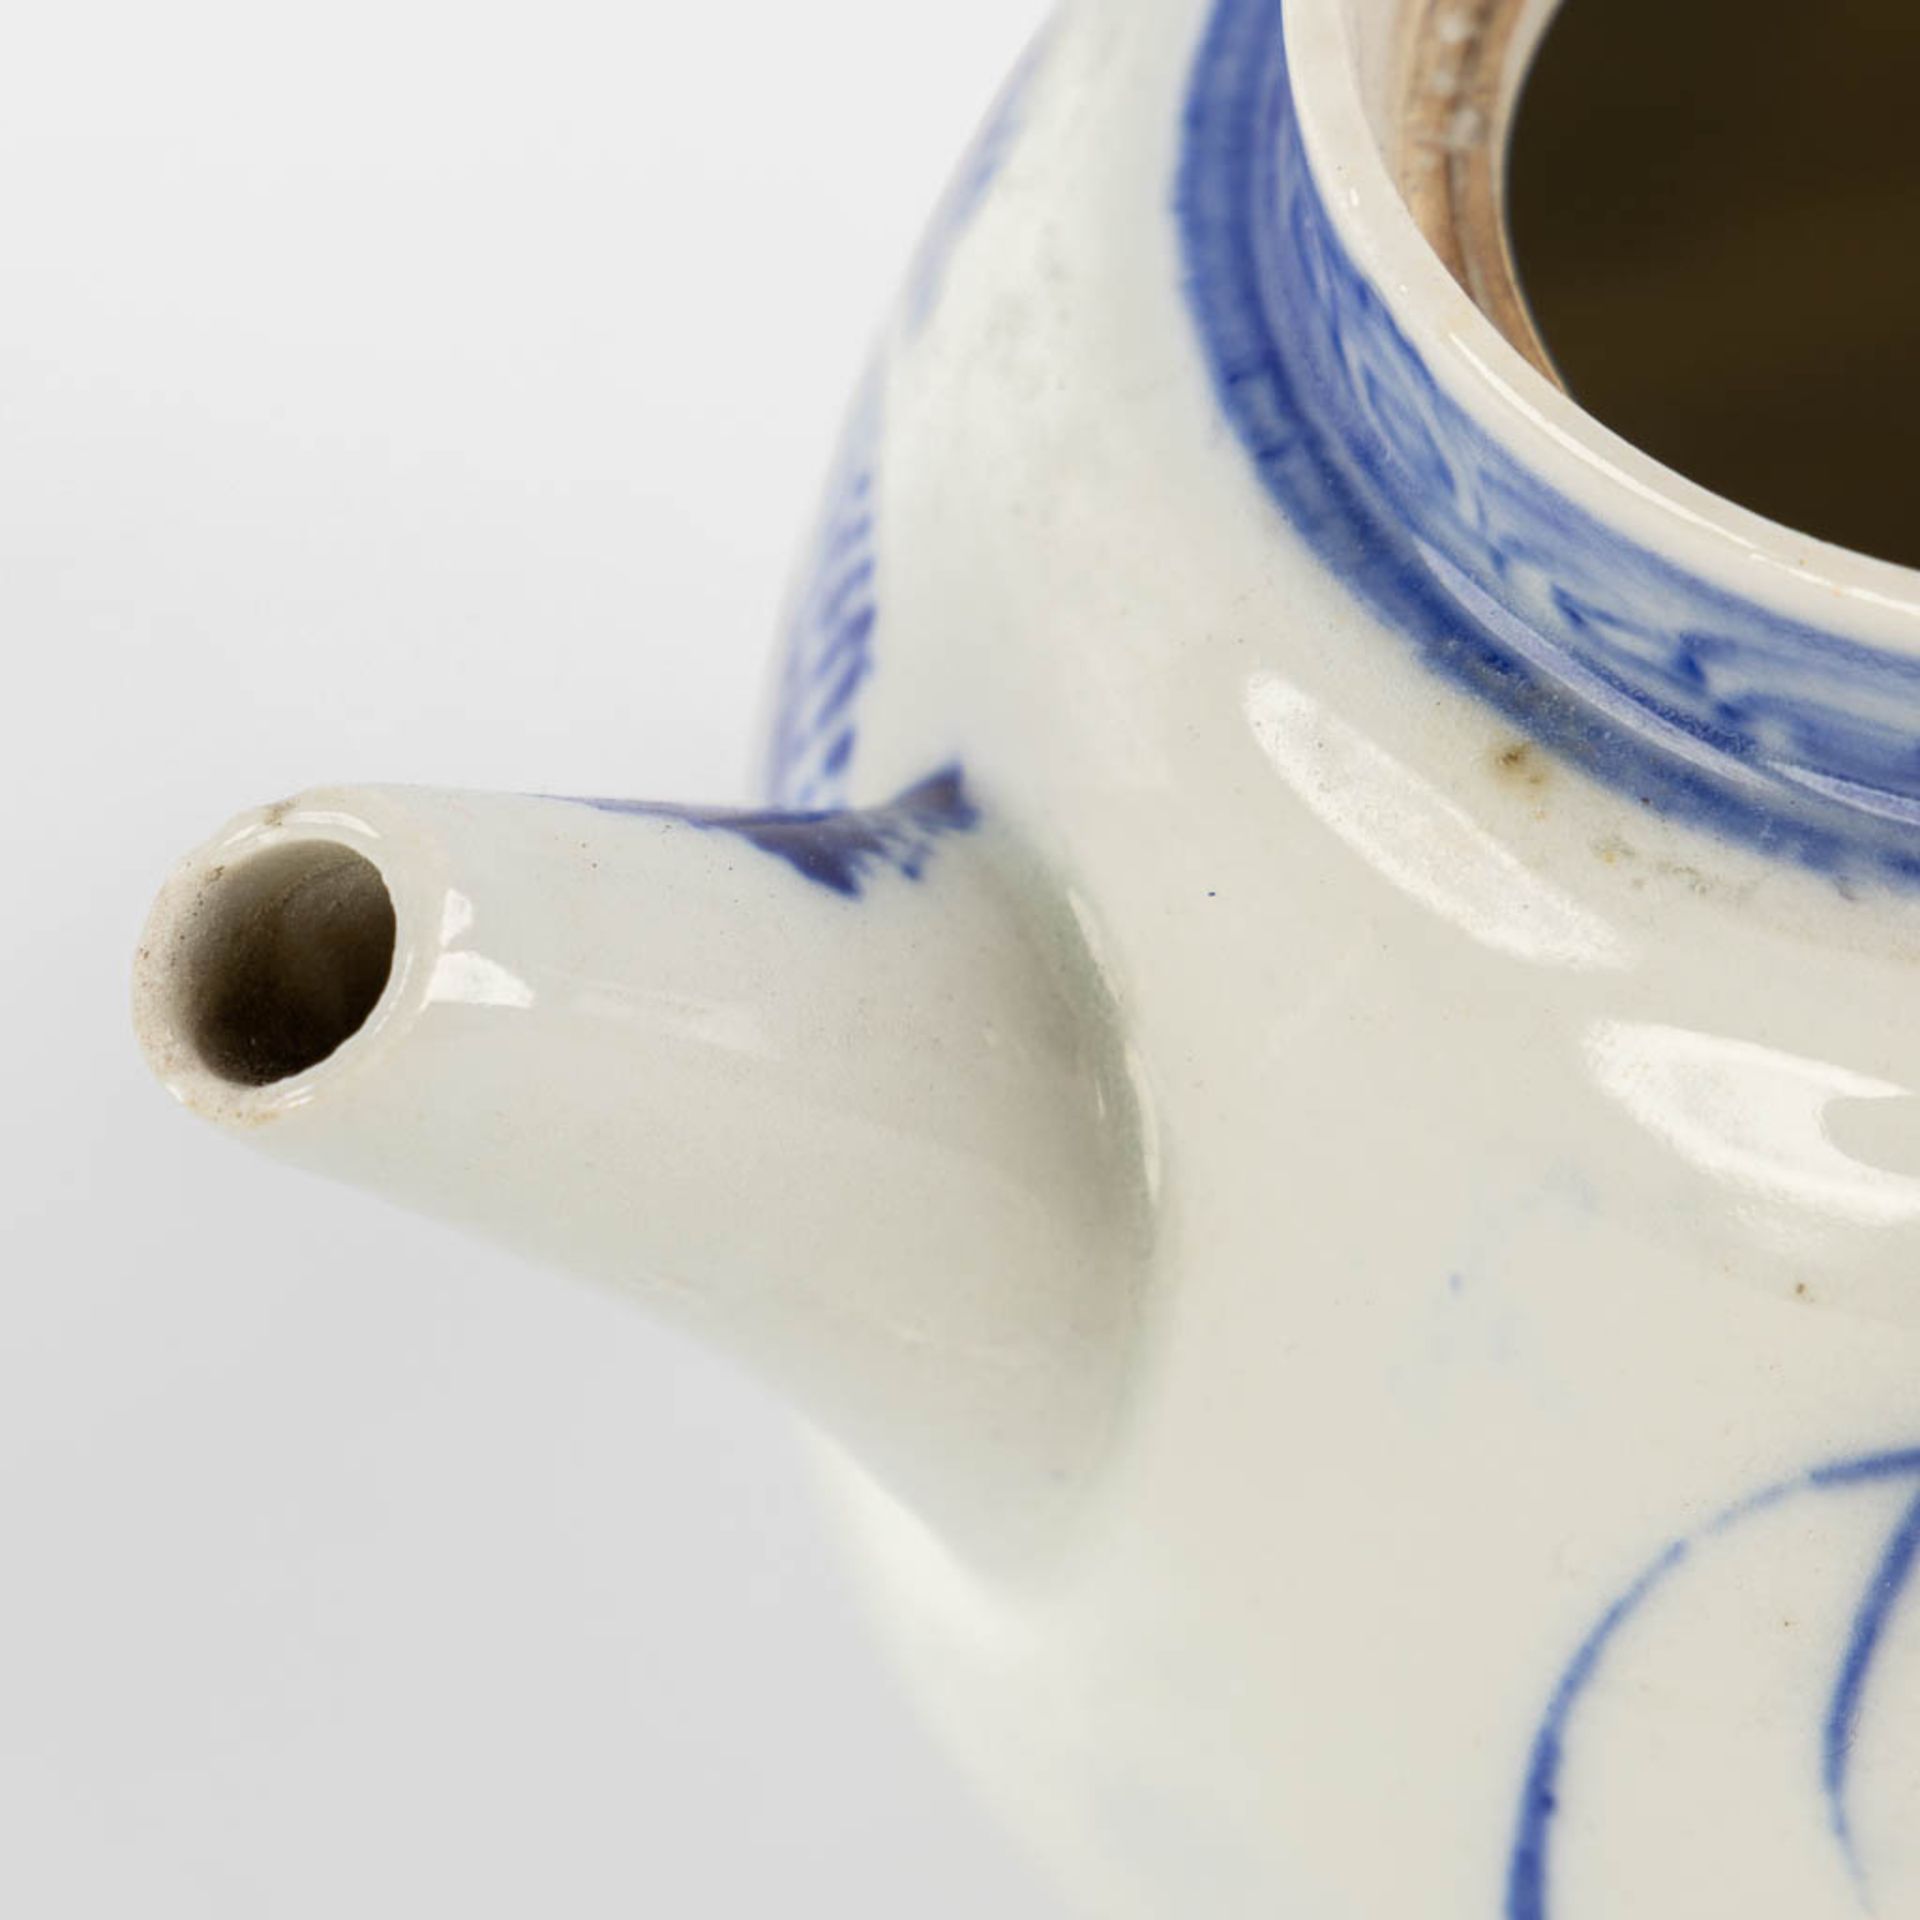 Three Chinese and Japanese teapots, blue-white decor. (W:20 x H:14 cm) - Image 17 of 17